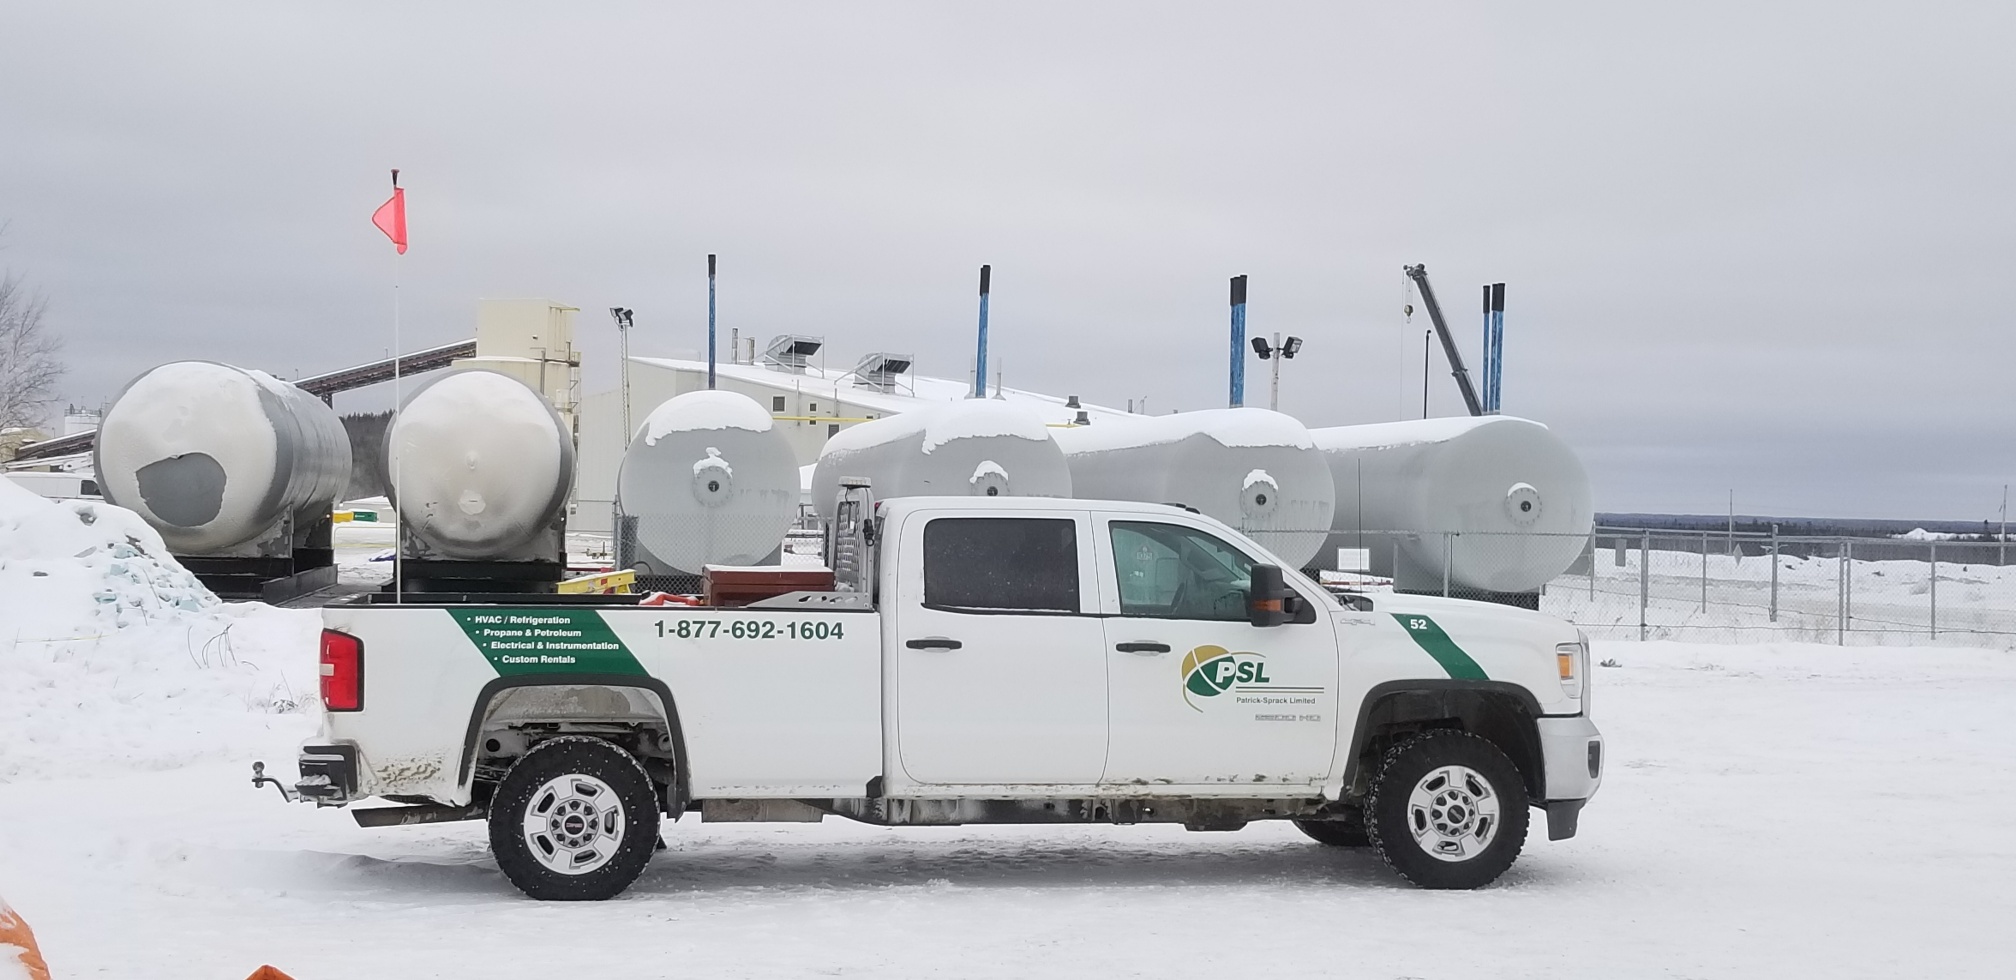 fossil fuel industry white truck on a mine site in front of propane tanks